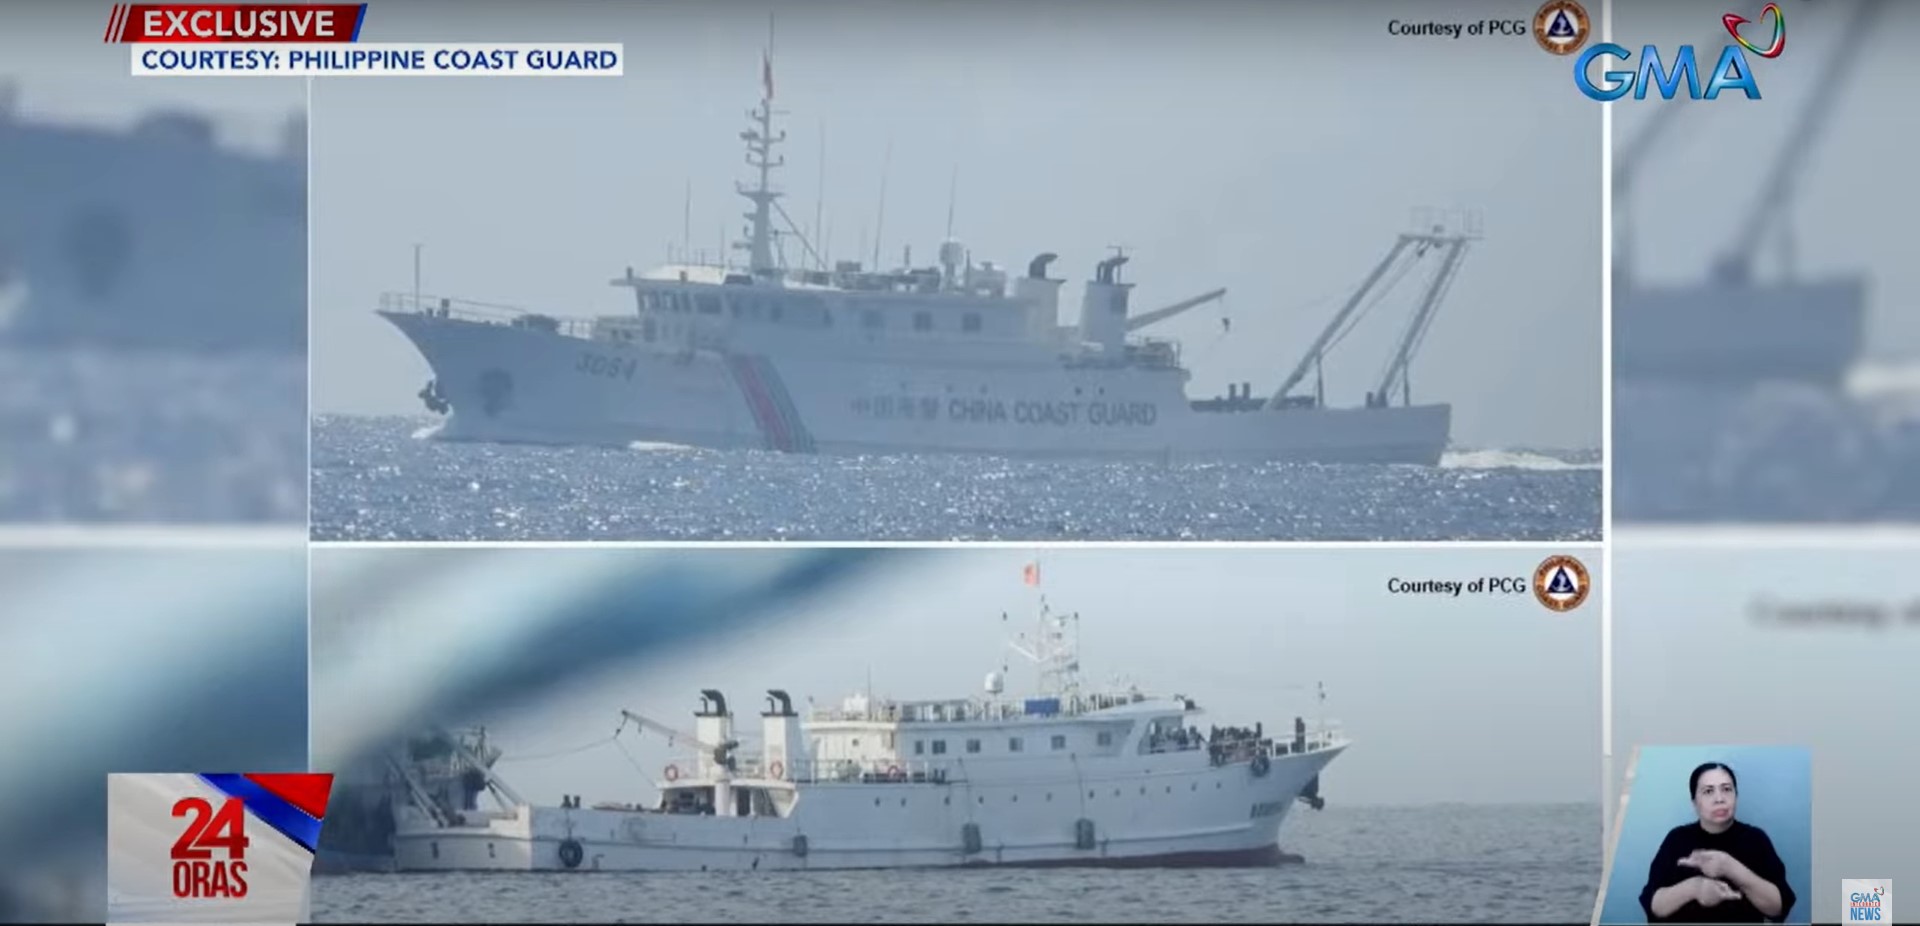 Chinese militia boats painted white to look like coast guard –PCG